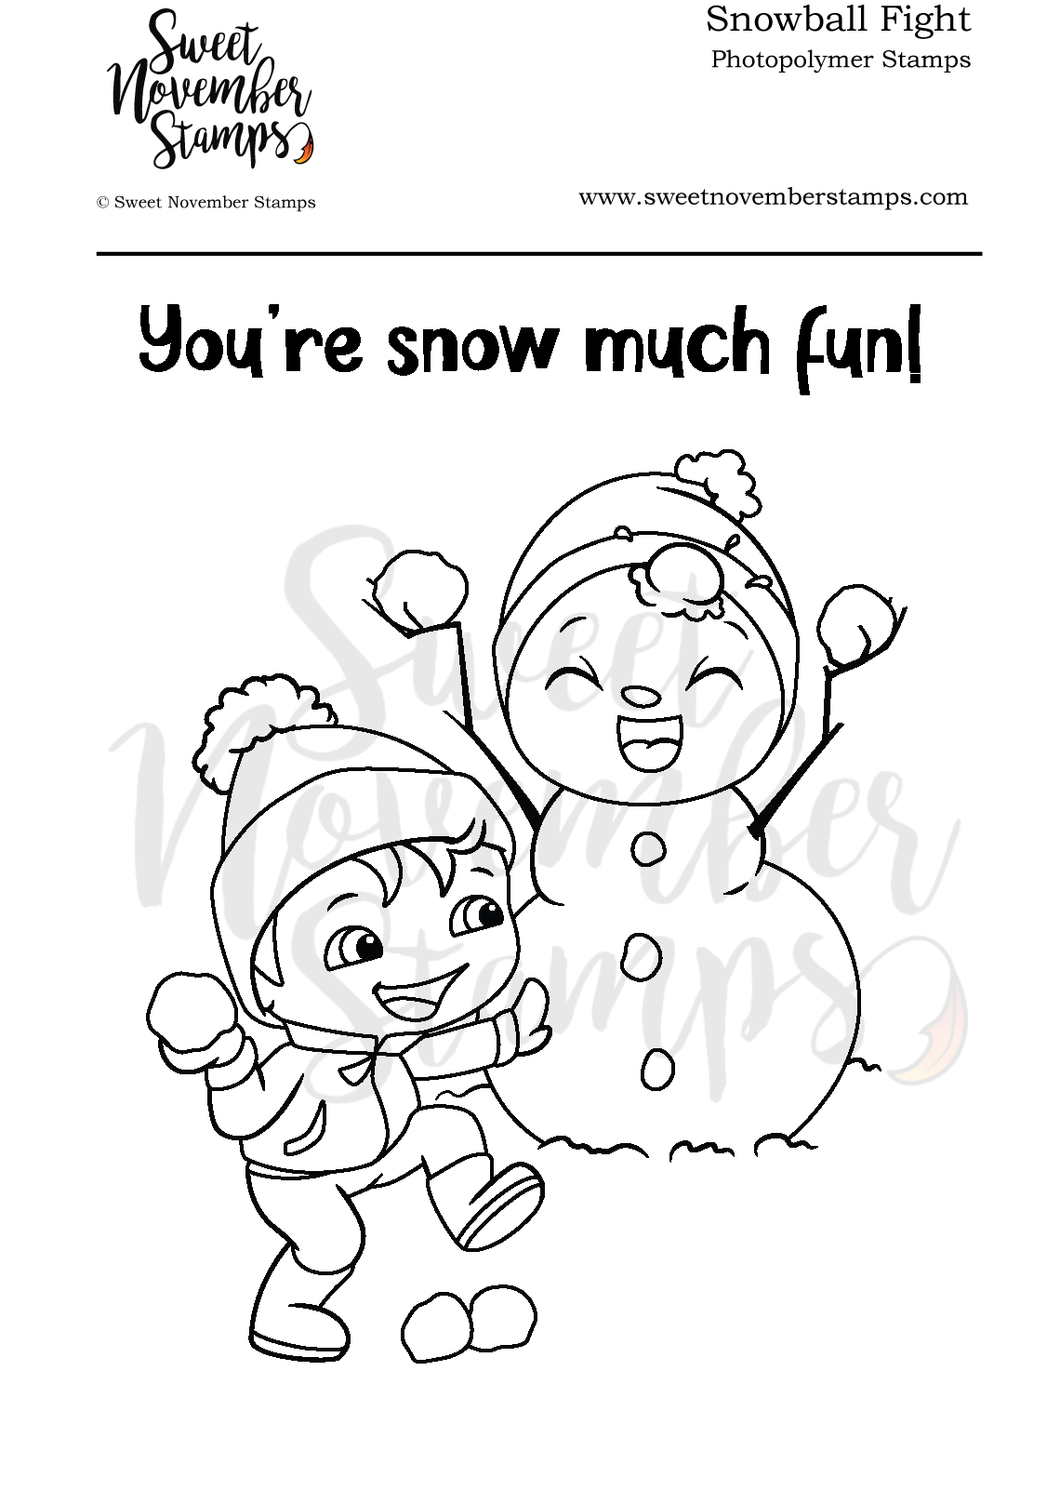 Clear Stamp Set - Snowball Fight